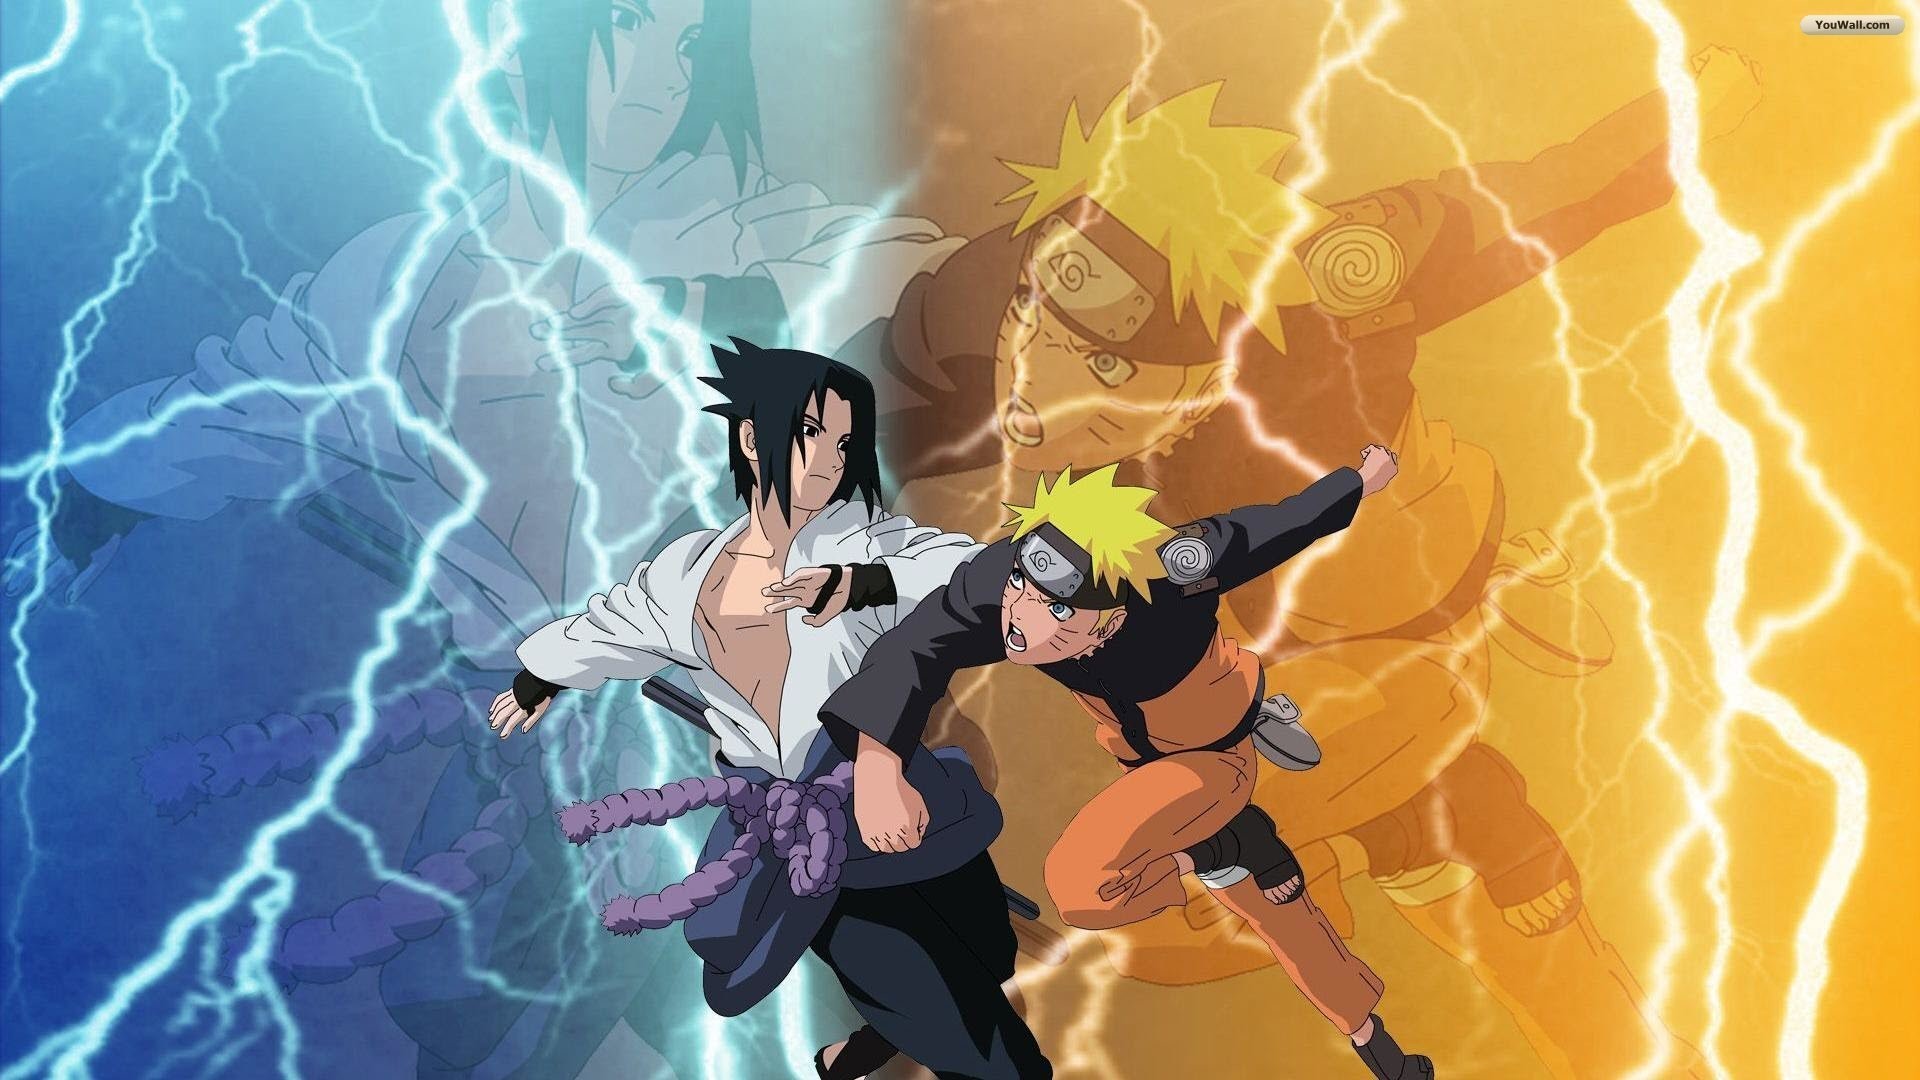 Wallpapers Naruto Shippuden Hd 2018 78 Pictures